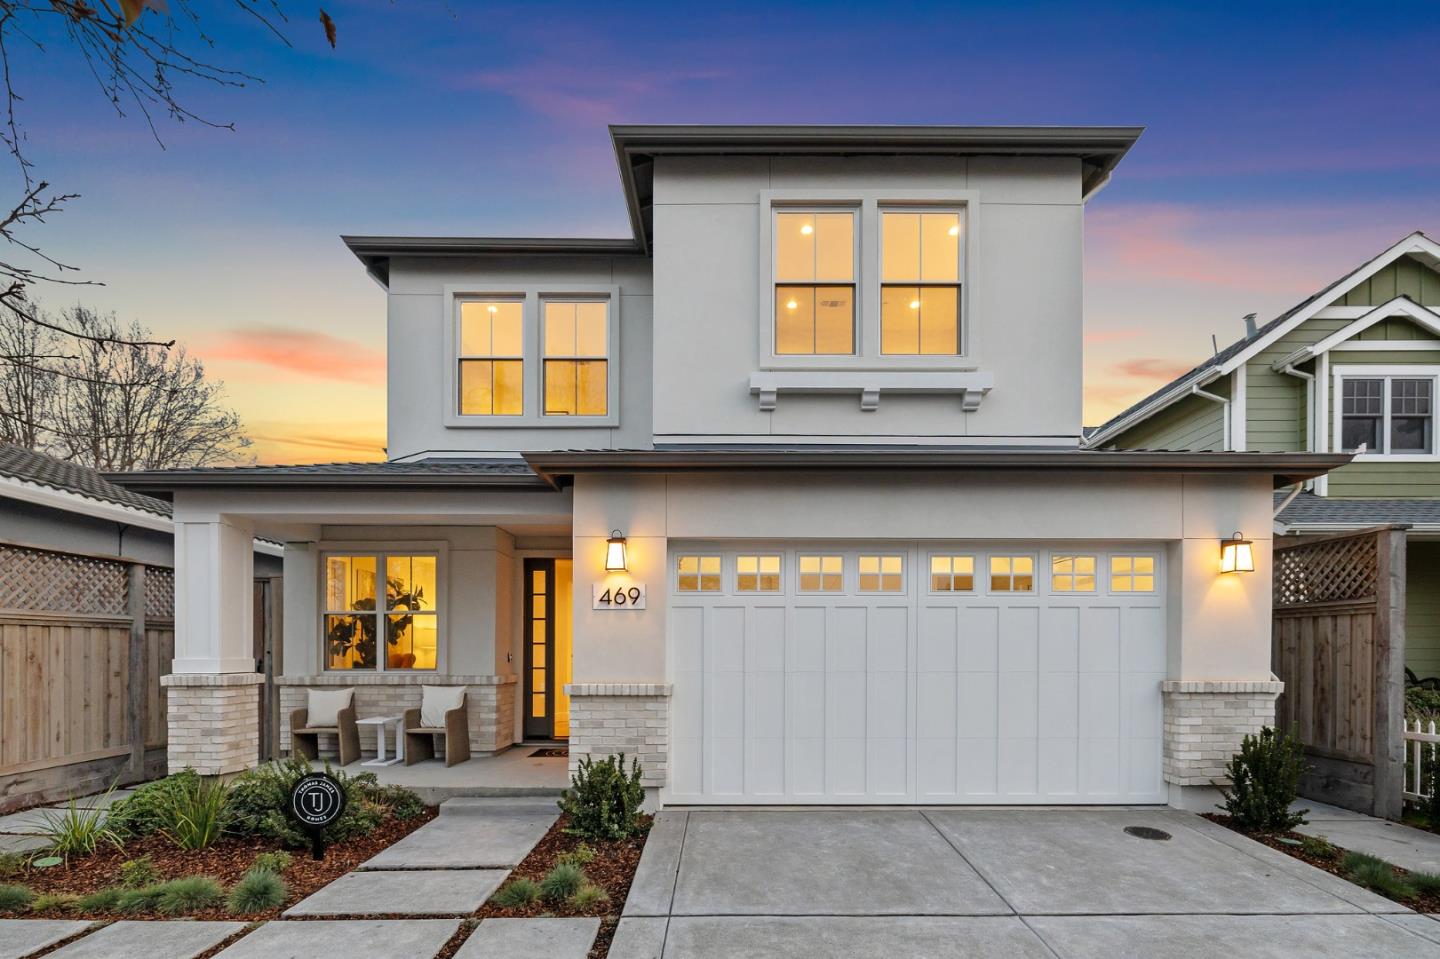 New construction built by Thomas James Homes in the quaint Beresford Manor neighborhood within walking distance to shops, restaurants, and schools. This Traditional-style home is centrally located in the Peninsula with easy commute options to San Francisco or the Silicon Valley, and is in the excellent Hillsdale High School District. The 4-bedroom, 3.5-bathroom home includes an office, dining area and great room centrally located off the foyer. The gourmet kitchen is an entertainers dream with a large eat-at island, and walk-in pantry. The ADU features a kitchenette, en suite bathroom and its own private entrance to the backyard and is ideal for multigenerational living, guest suite or work from home set-up. Ascend the stairs to a versatile loft, 2 secondary bedrooms, a full bathroom, and laundry room with sink and storage. Indulge in the luxuries of the grand suite's walk-in closet and spa-inspired bath, which includes dual vanities, a free-standing soaking tub, and a walk-in shower."